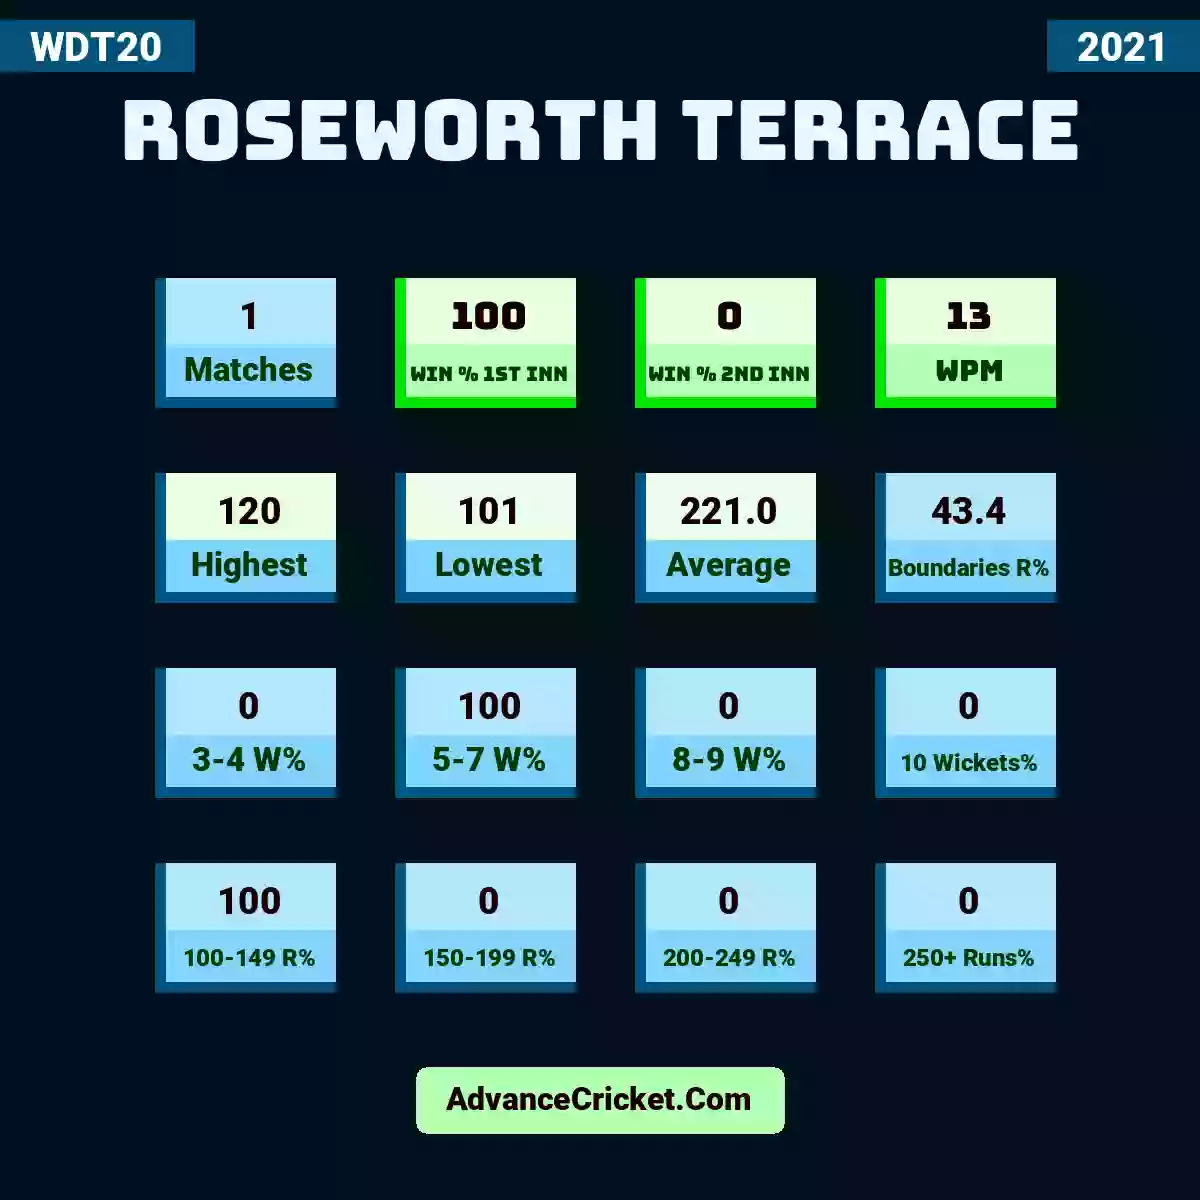 Image showing Roseworth Terrace with Matches: 1, Win % 1st Inn: 100, Win % 2nd Inn: 0, WPM: 13, Highest: 120, Lowest: 101, Average: 221.0, Boundaries R%: 43.4, 3-4 W%: 0, 5-7 W%: 100, 8-9 W%: 0, 10 Wickets%: 0, 100-149 R%: 100, 150-199 R%: 0, 200-249 R%: 0, 250+ Runs%: 0.